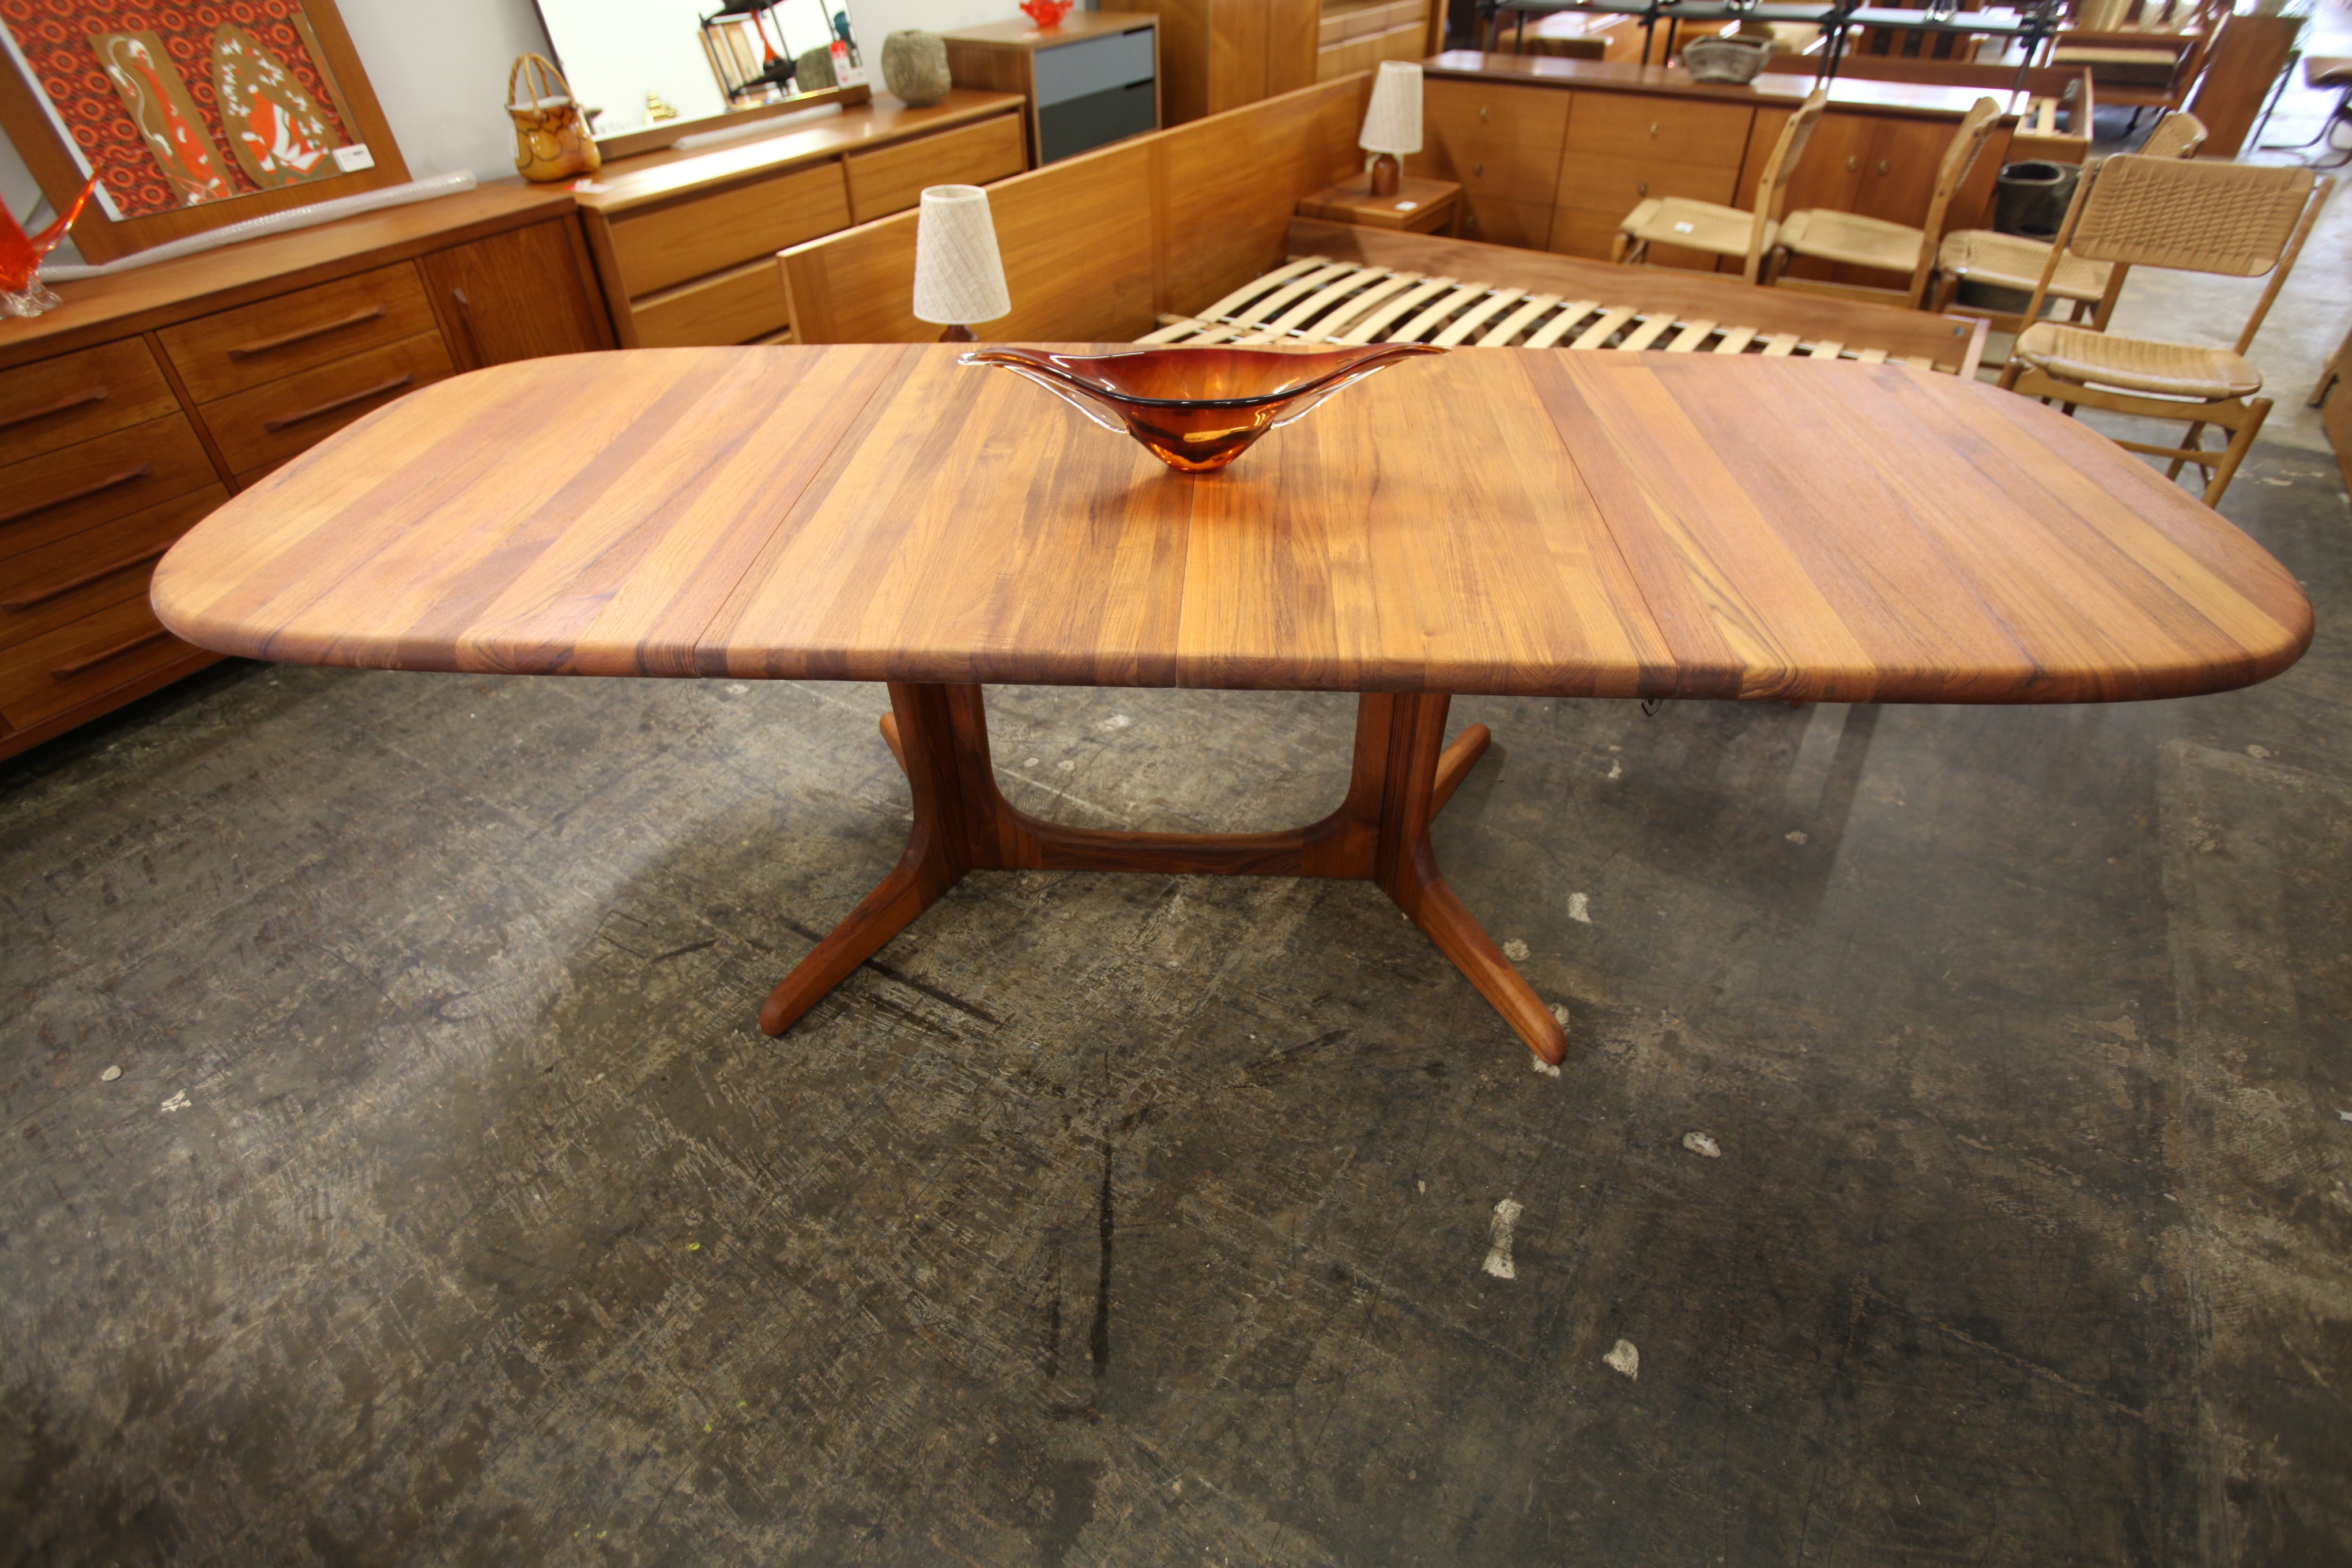 Rare & Beautiful "SOLID" Teak Dining Table w/ 2 Leafs 102" Long